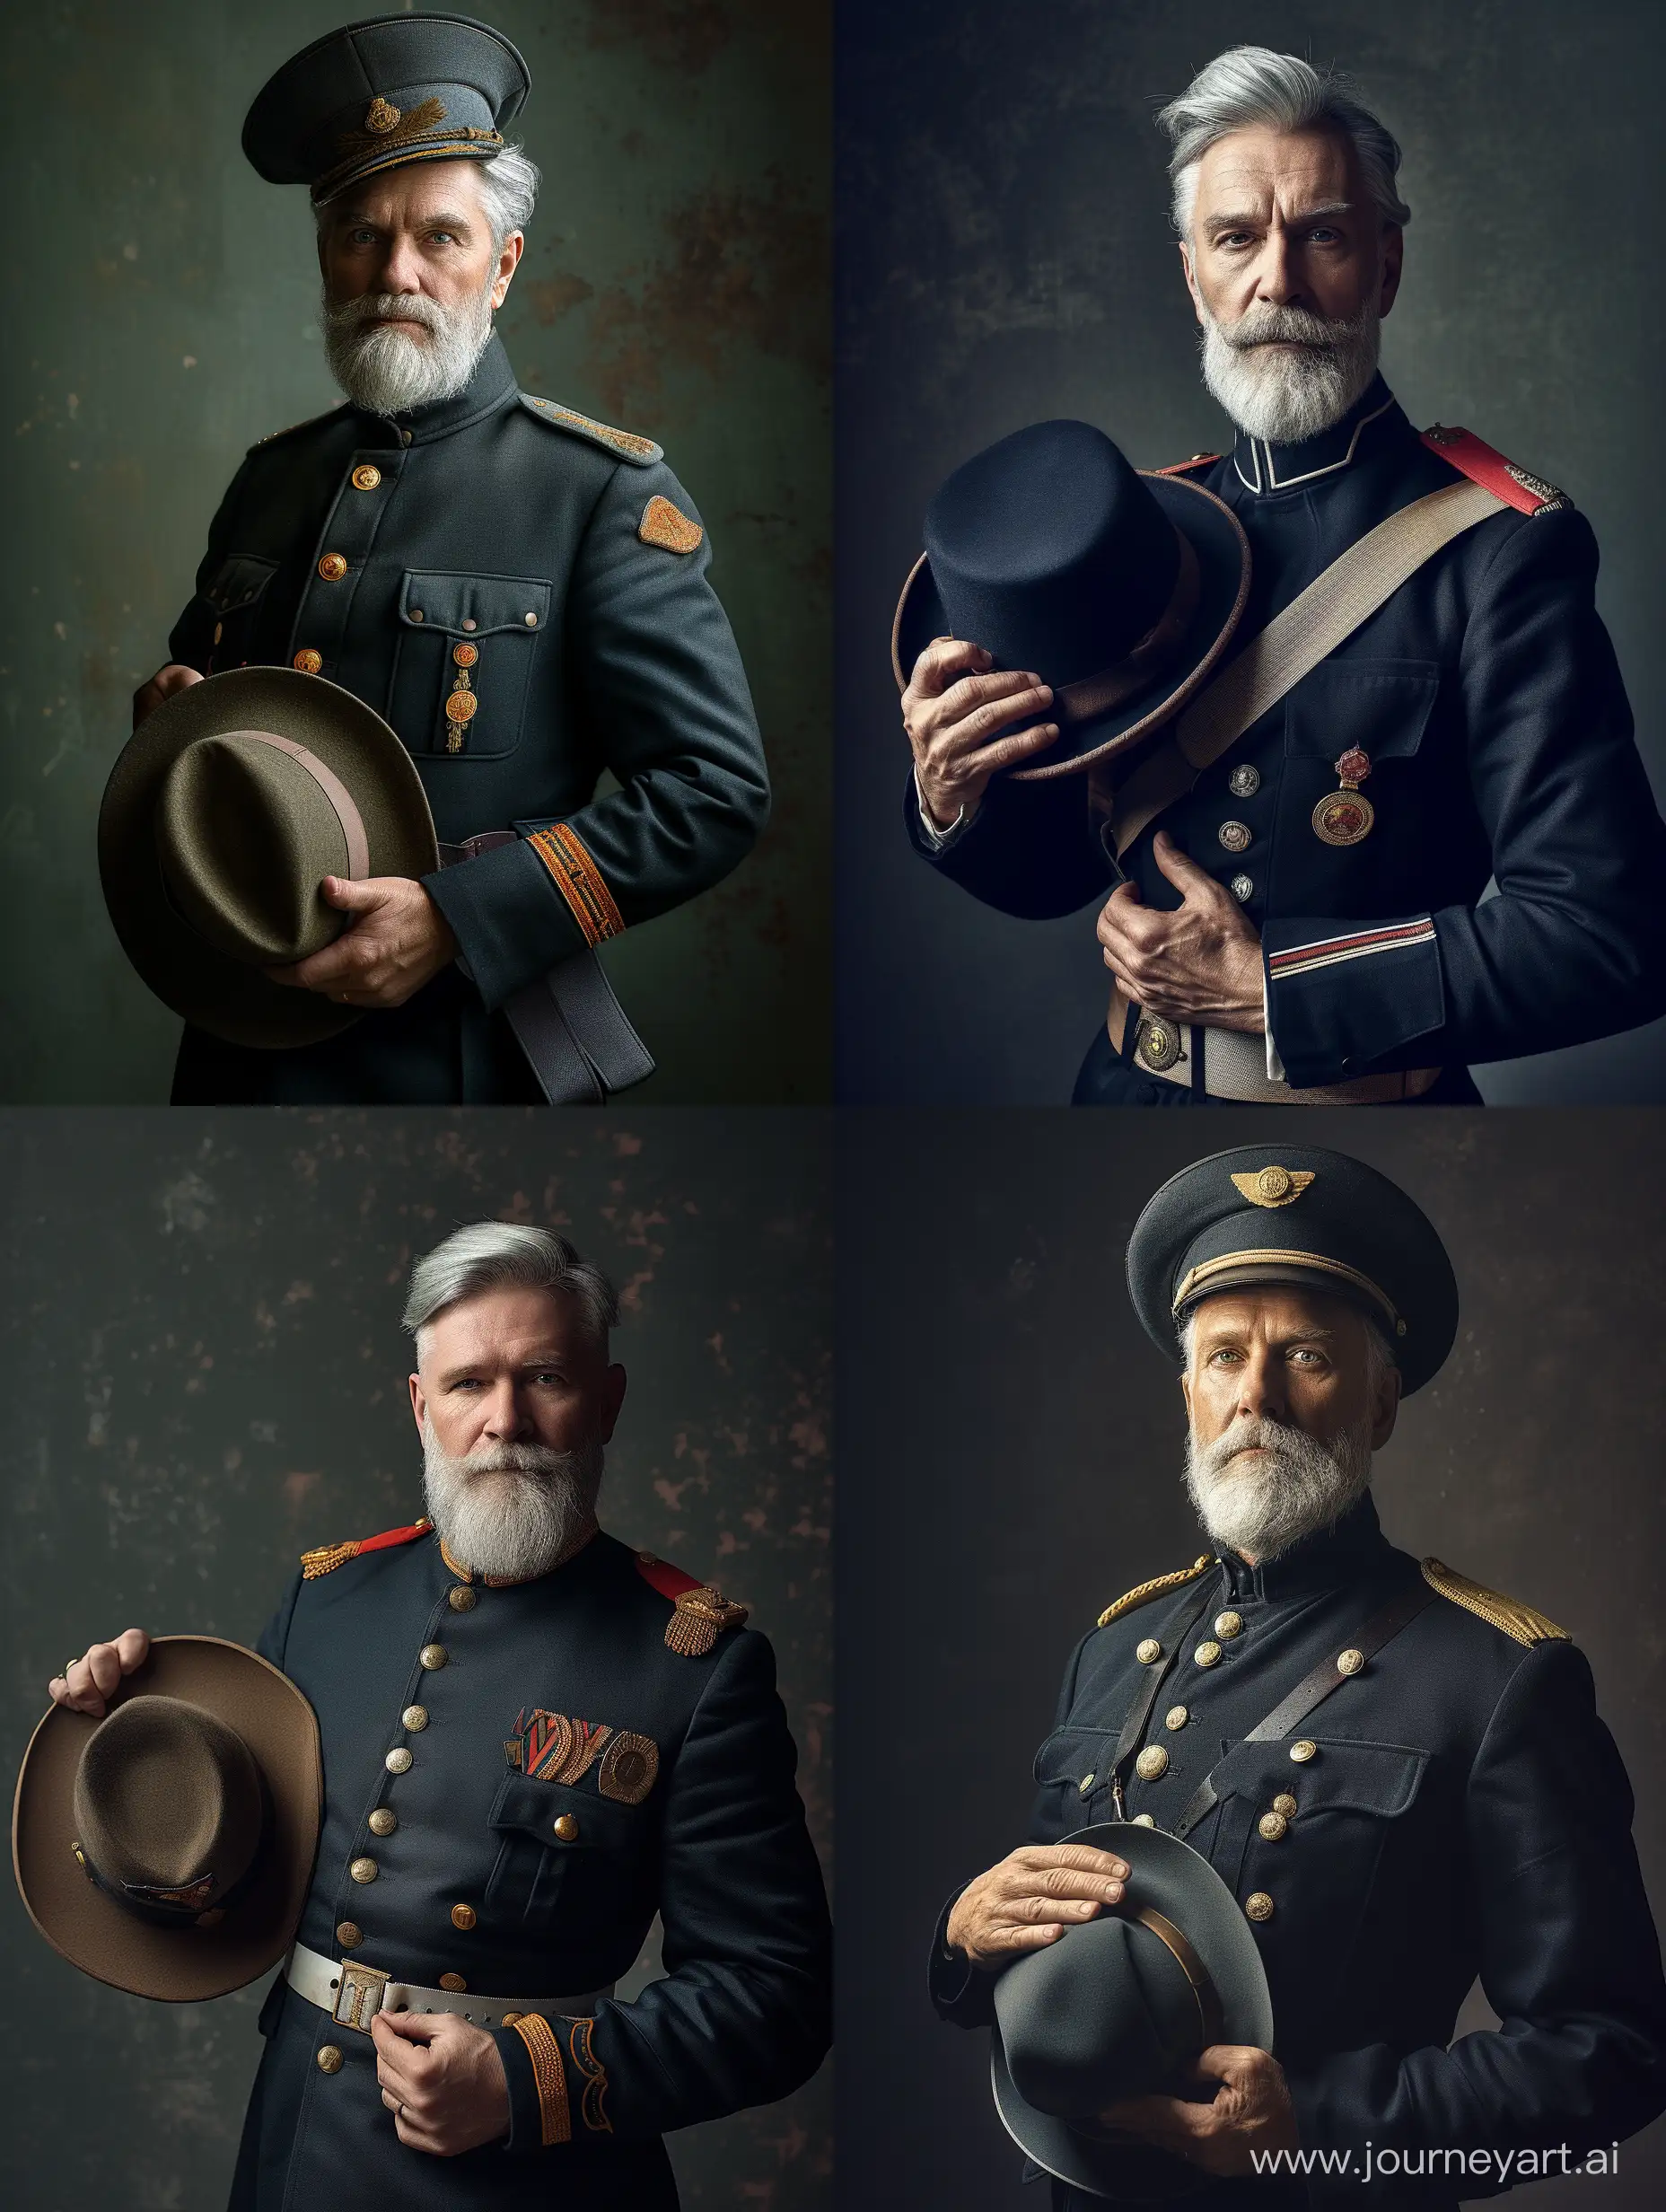 Canon EOS 5D Mark II + Canon EF 70-200mm f/2.8L IS II USM, a man in a military uniform holding a hat, a character portrait, by Mikhail Evstafiev, pixabay contest winner, silver hair and beard, professional studio photograph, dressed like in the 1940s, old masters light composition